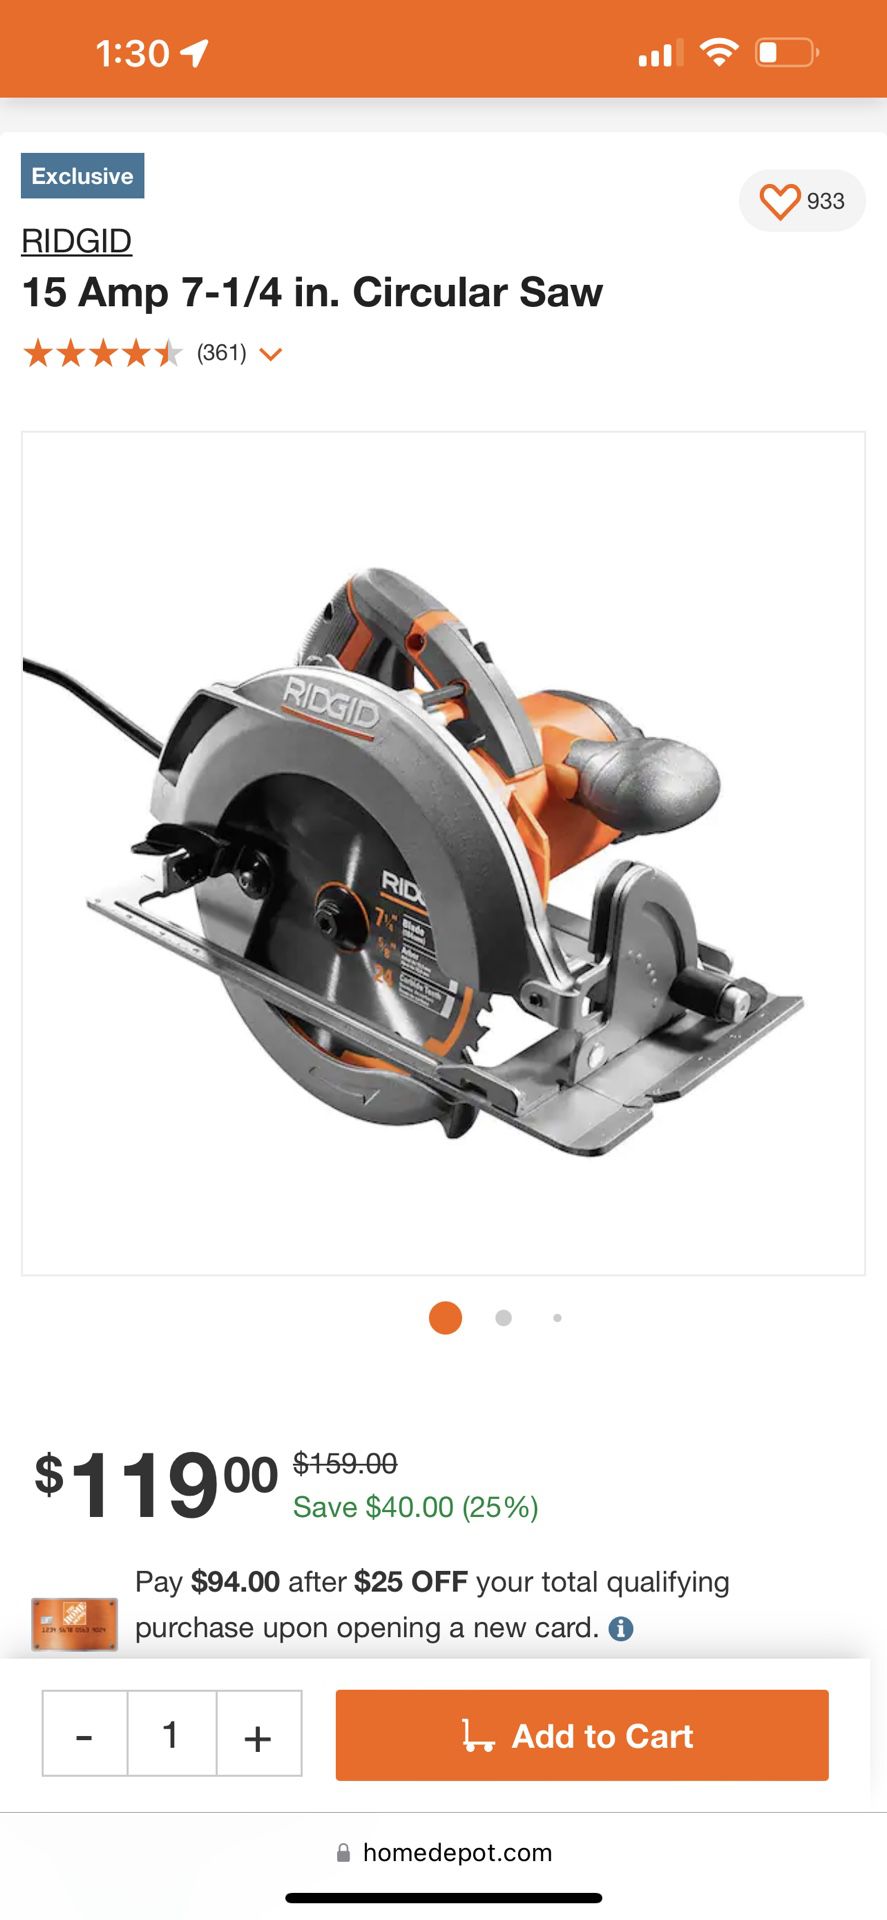 RIDGID 15 Amp 7-1/4 in. Circular Saw for Sale in Duncanville, TX OfferUp